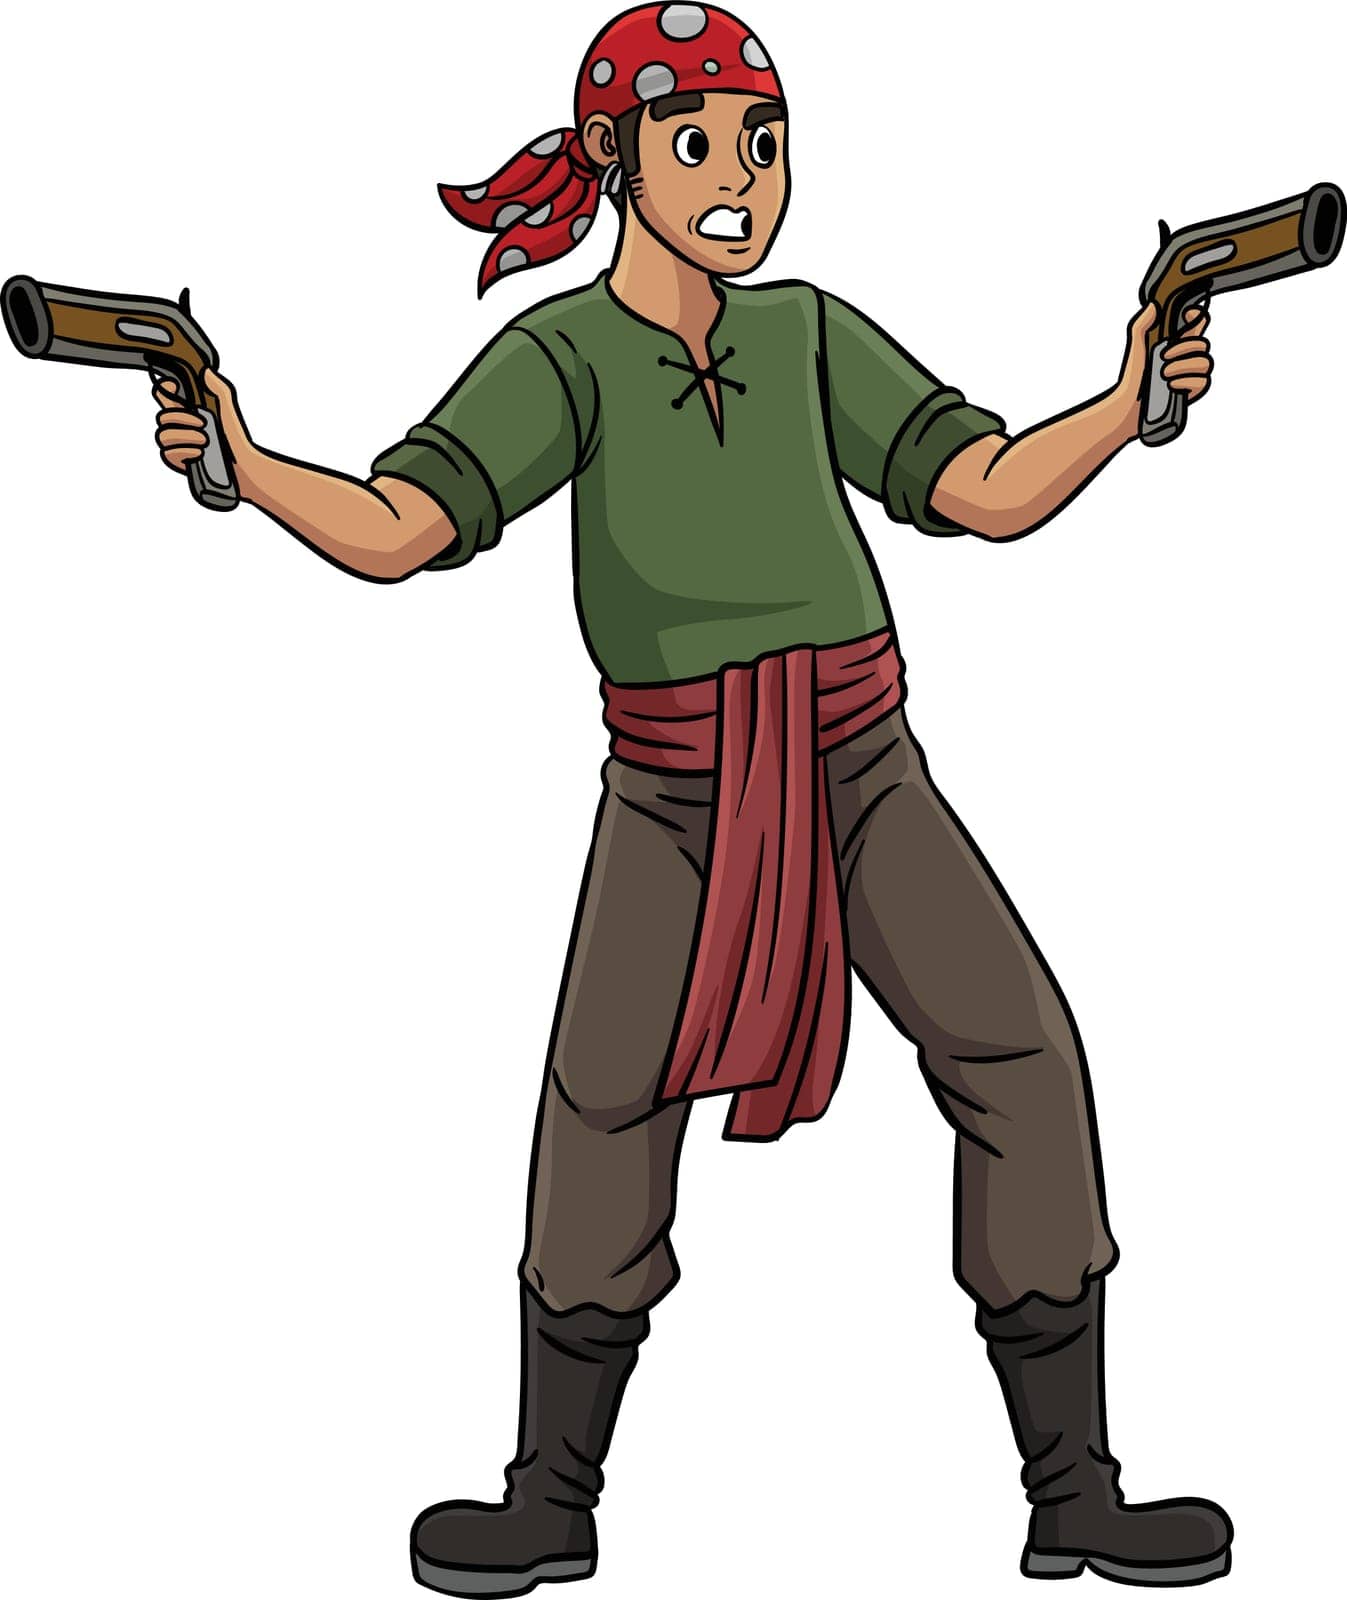 This cartoon clipart shows a Pirate with a Gun illustration.